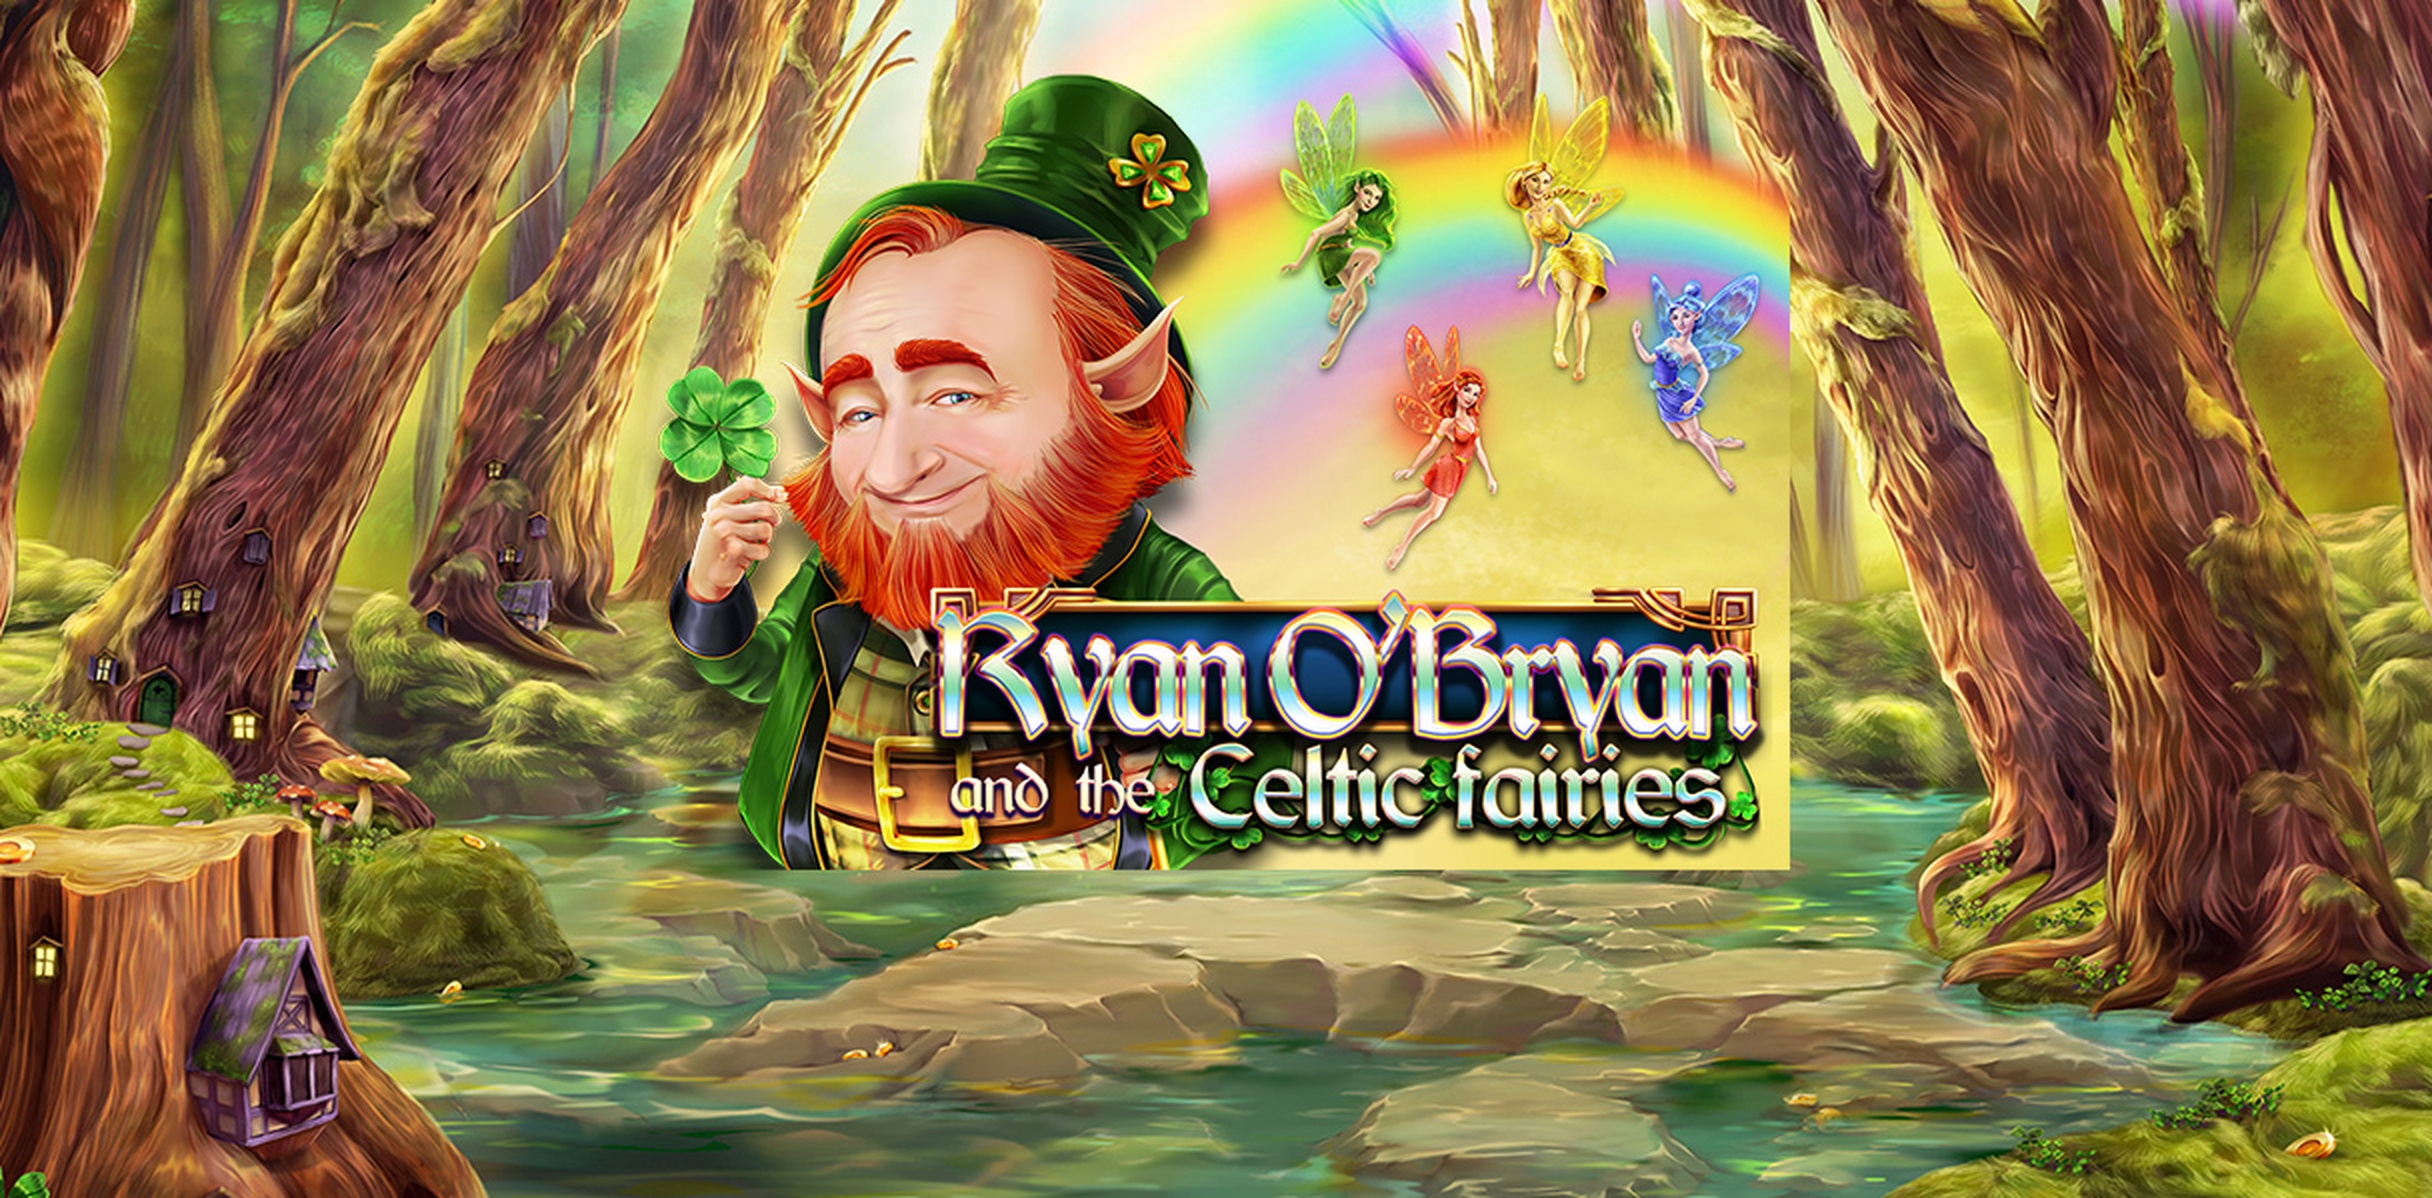 The Ryan O'Bryan and the Celtic Fairies Online Slot Demo Game by Red Rake Gaming